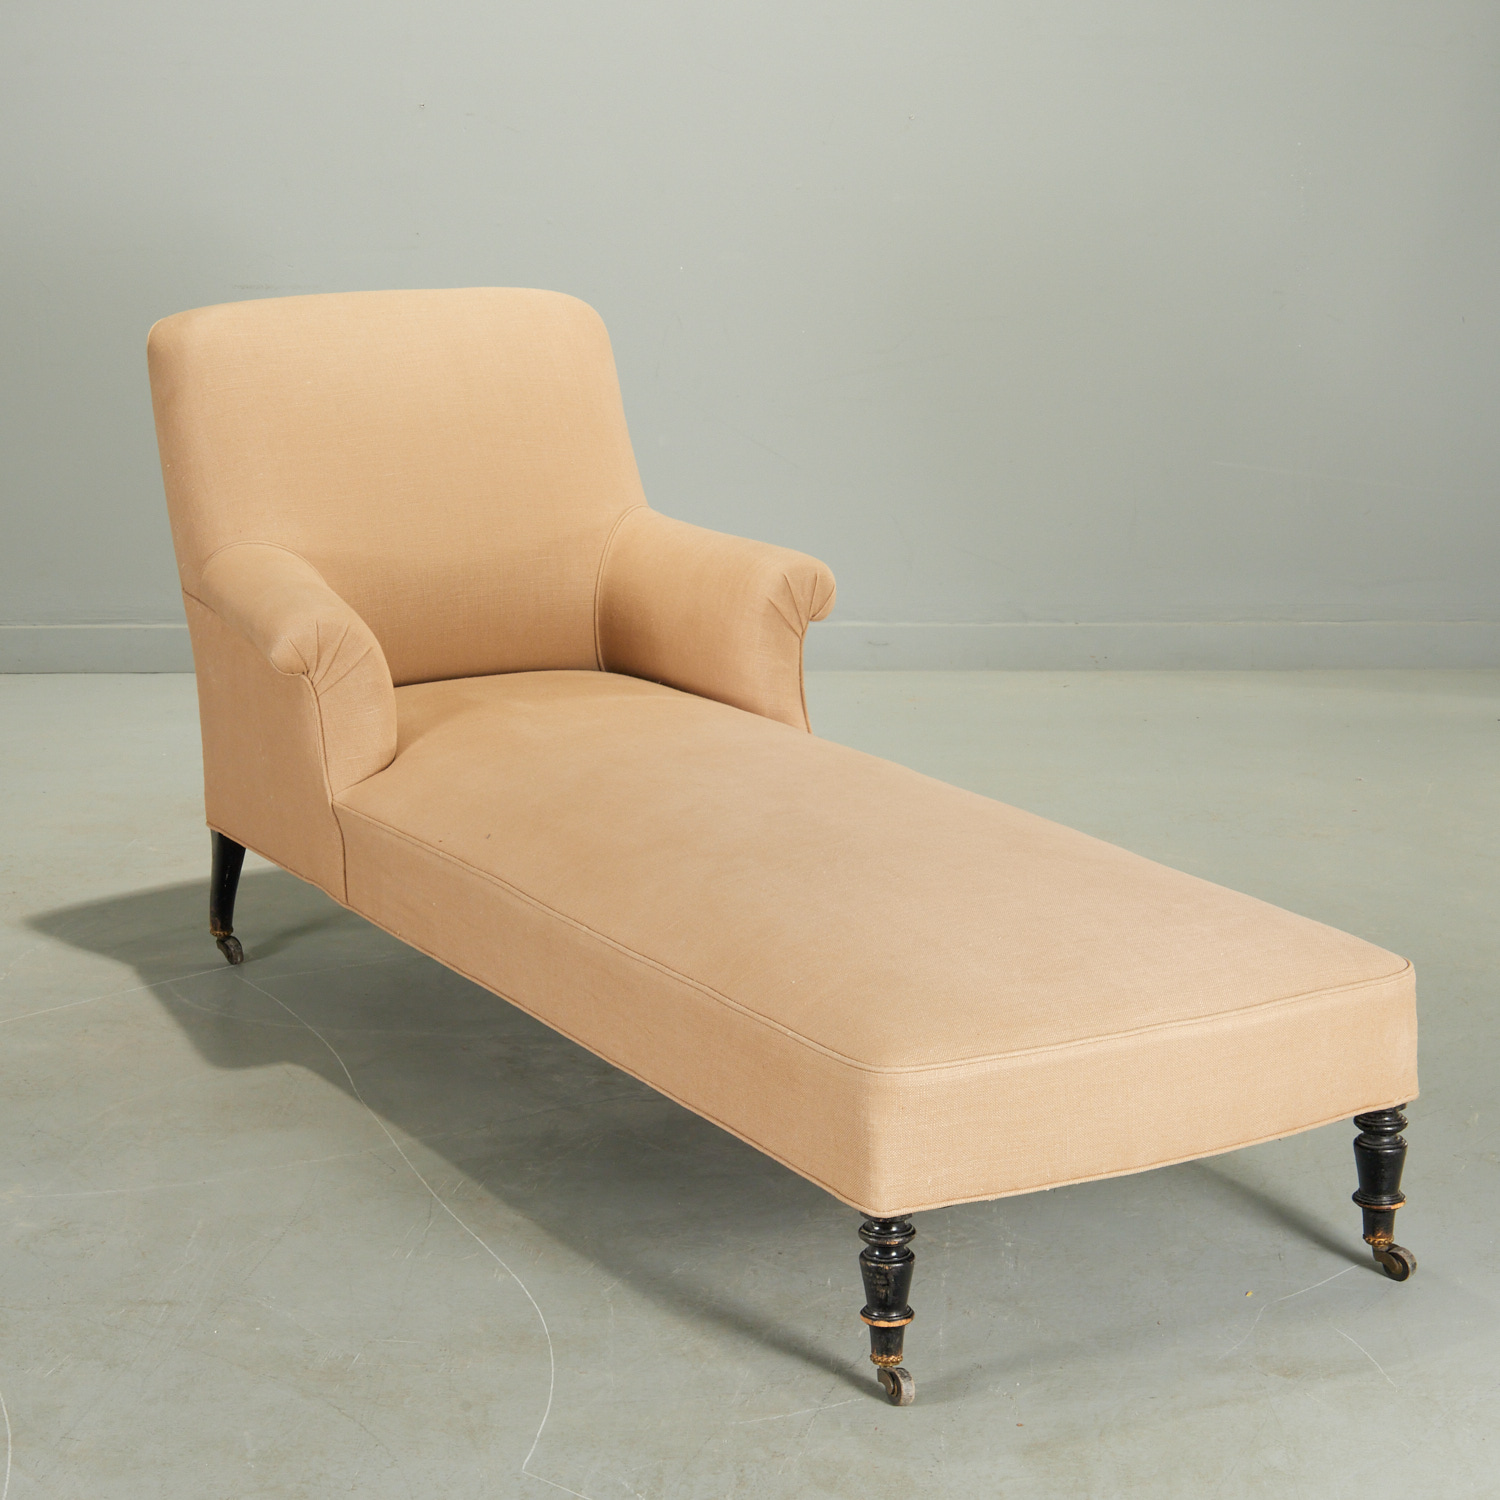 EDWARDIAN UPHOLSTERED CHAISE LOUNGE 30bd2b